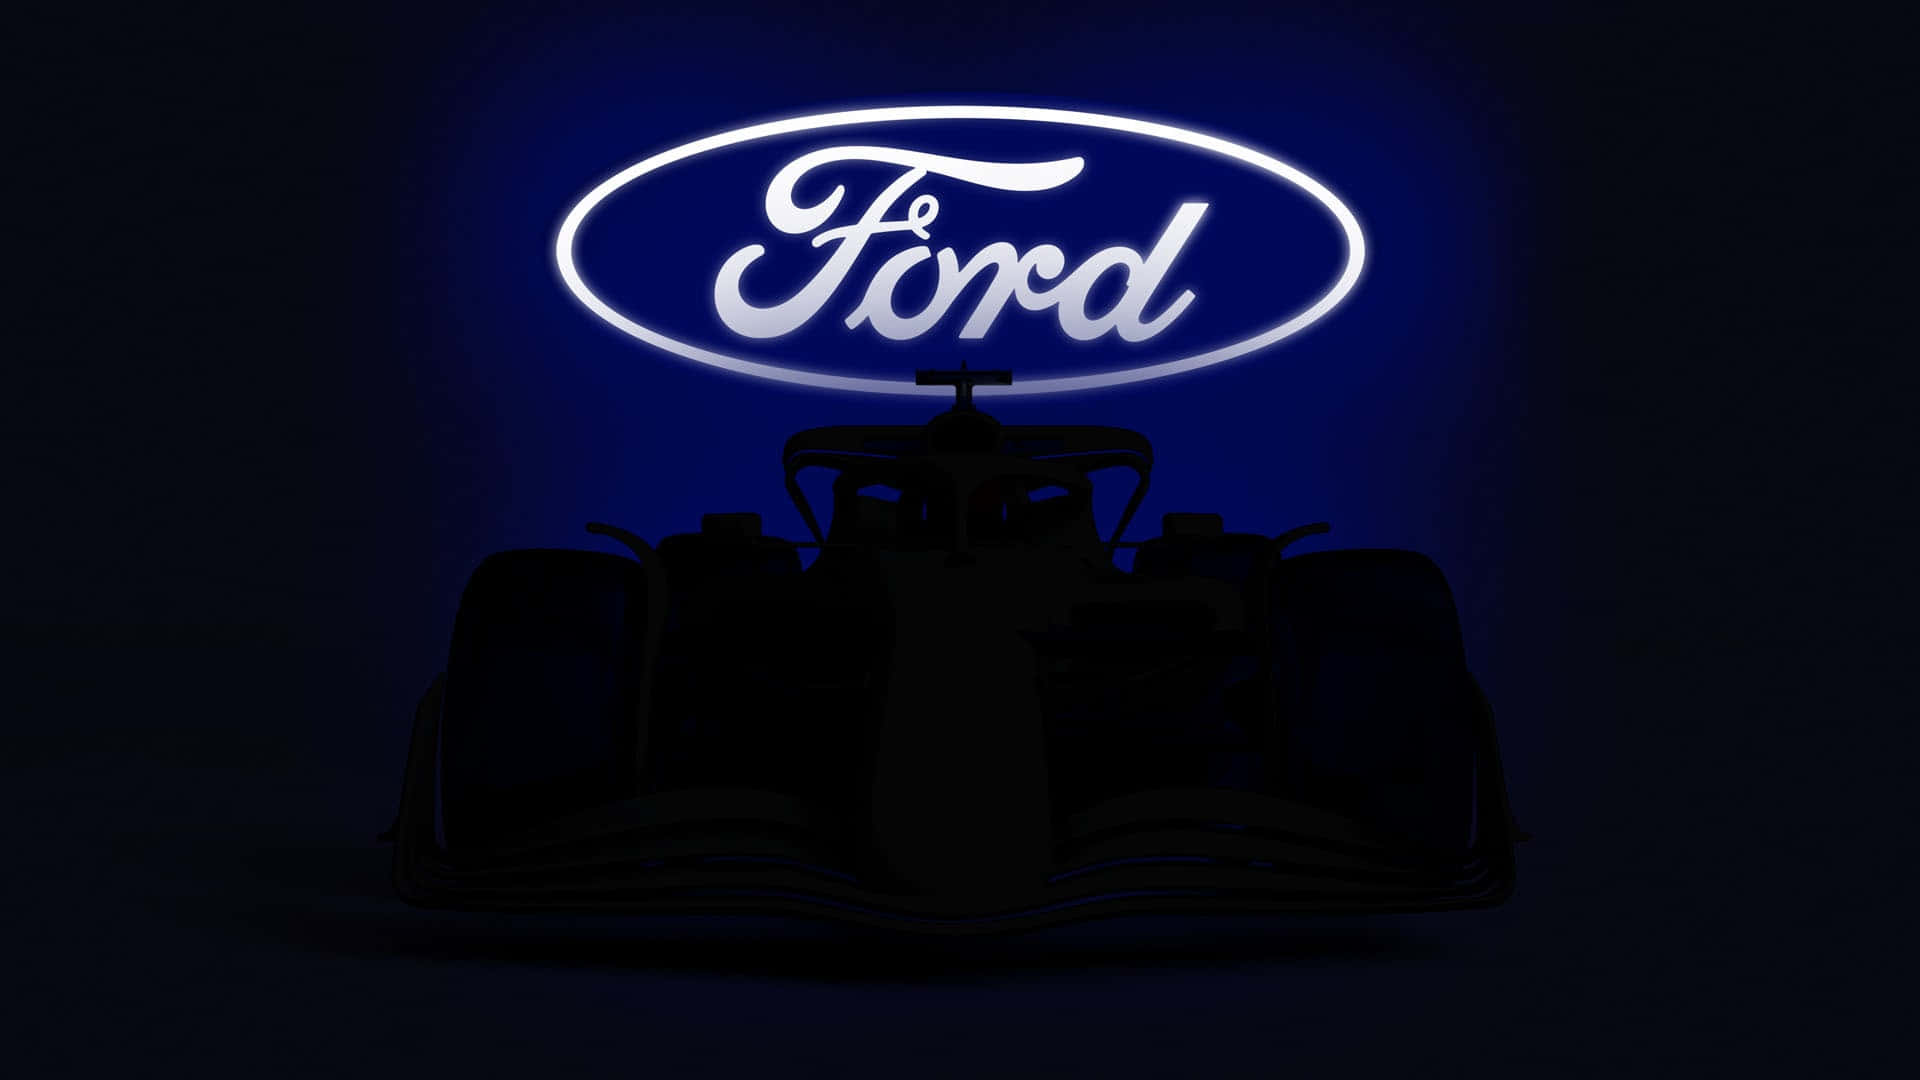 Ready for Anything - Move Forward with Ford